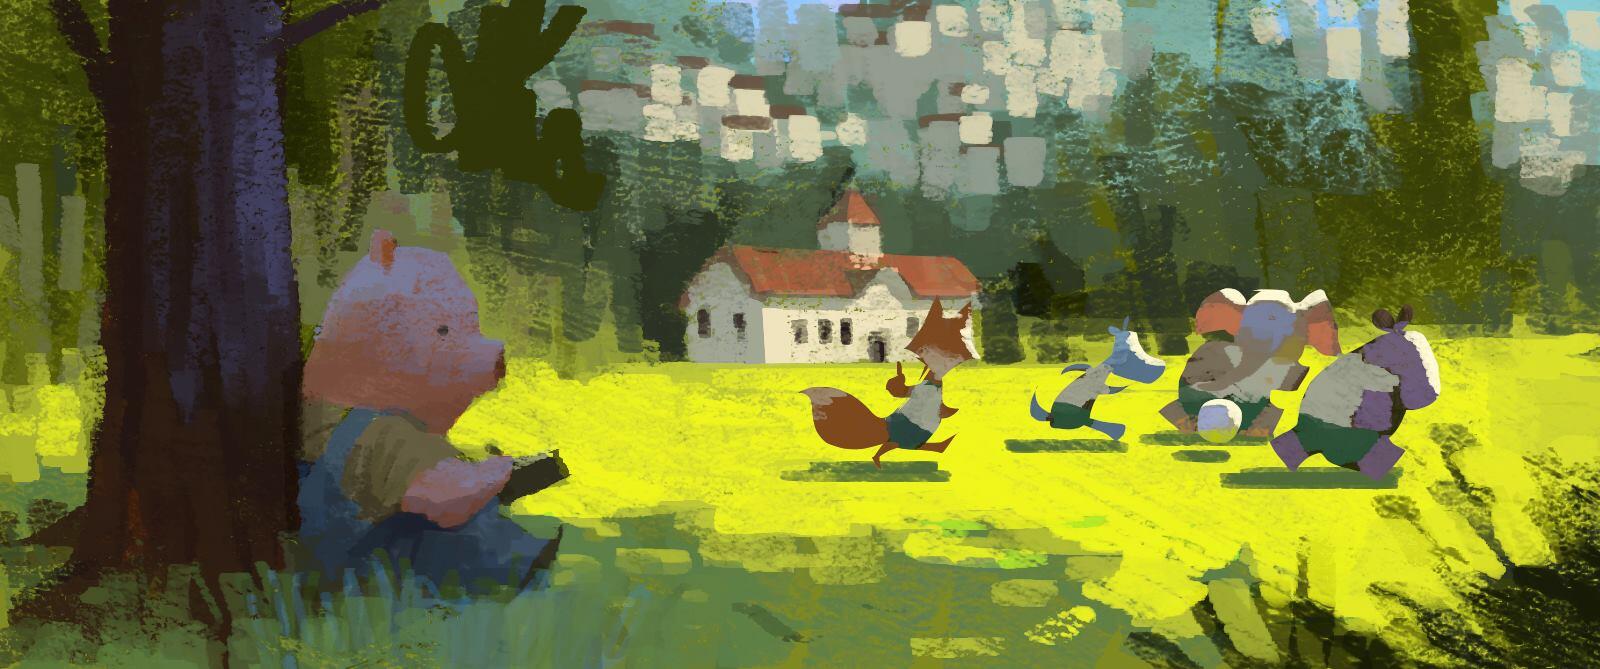 The Dam Keeper on X: Twitter results for 'dam' 'keeper' are